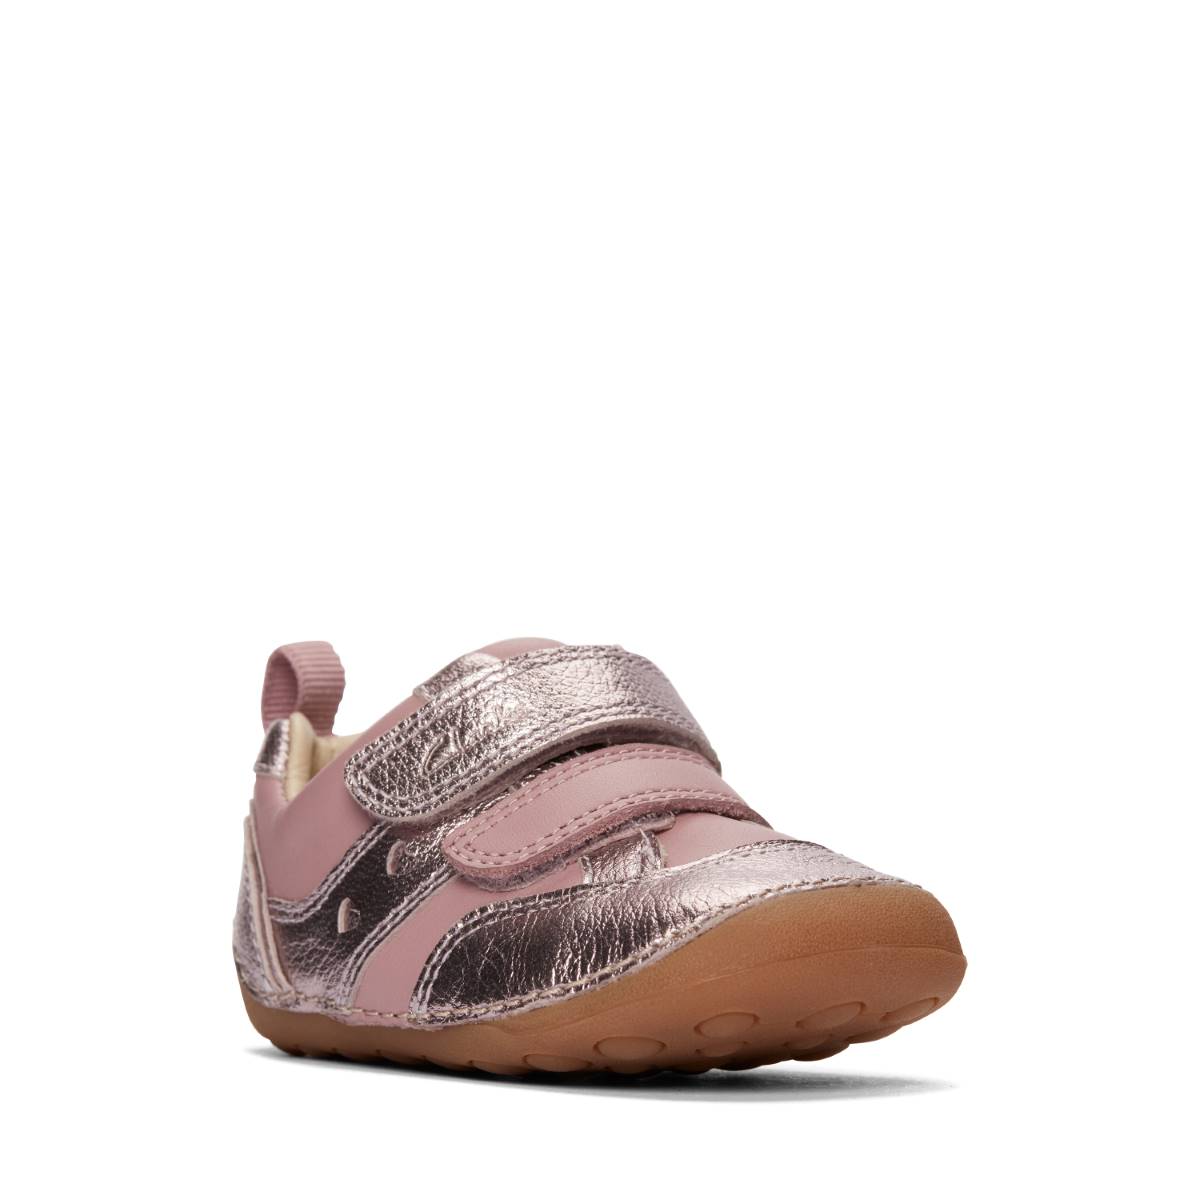 Clarks Tiny Sky T Blush Pink Kids girls first and baby shoes 7528-17G in a Plain Leather in Size 3